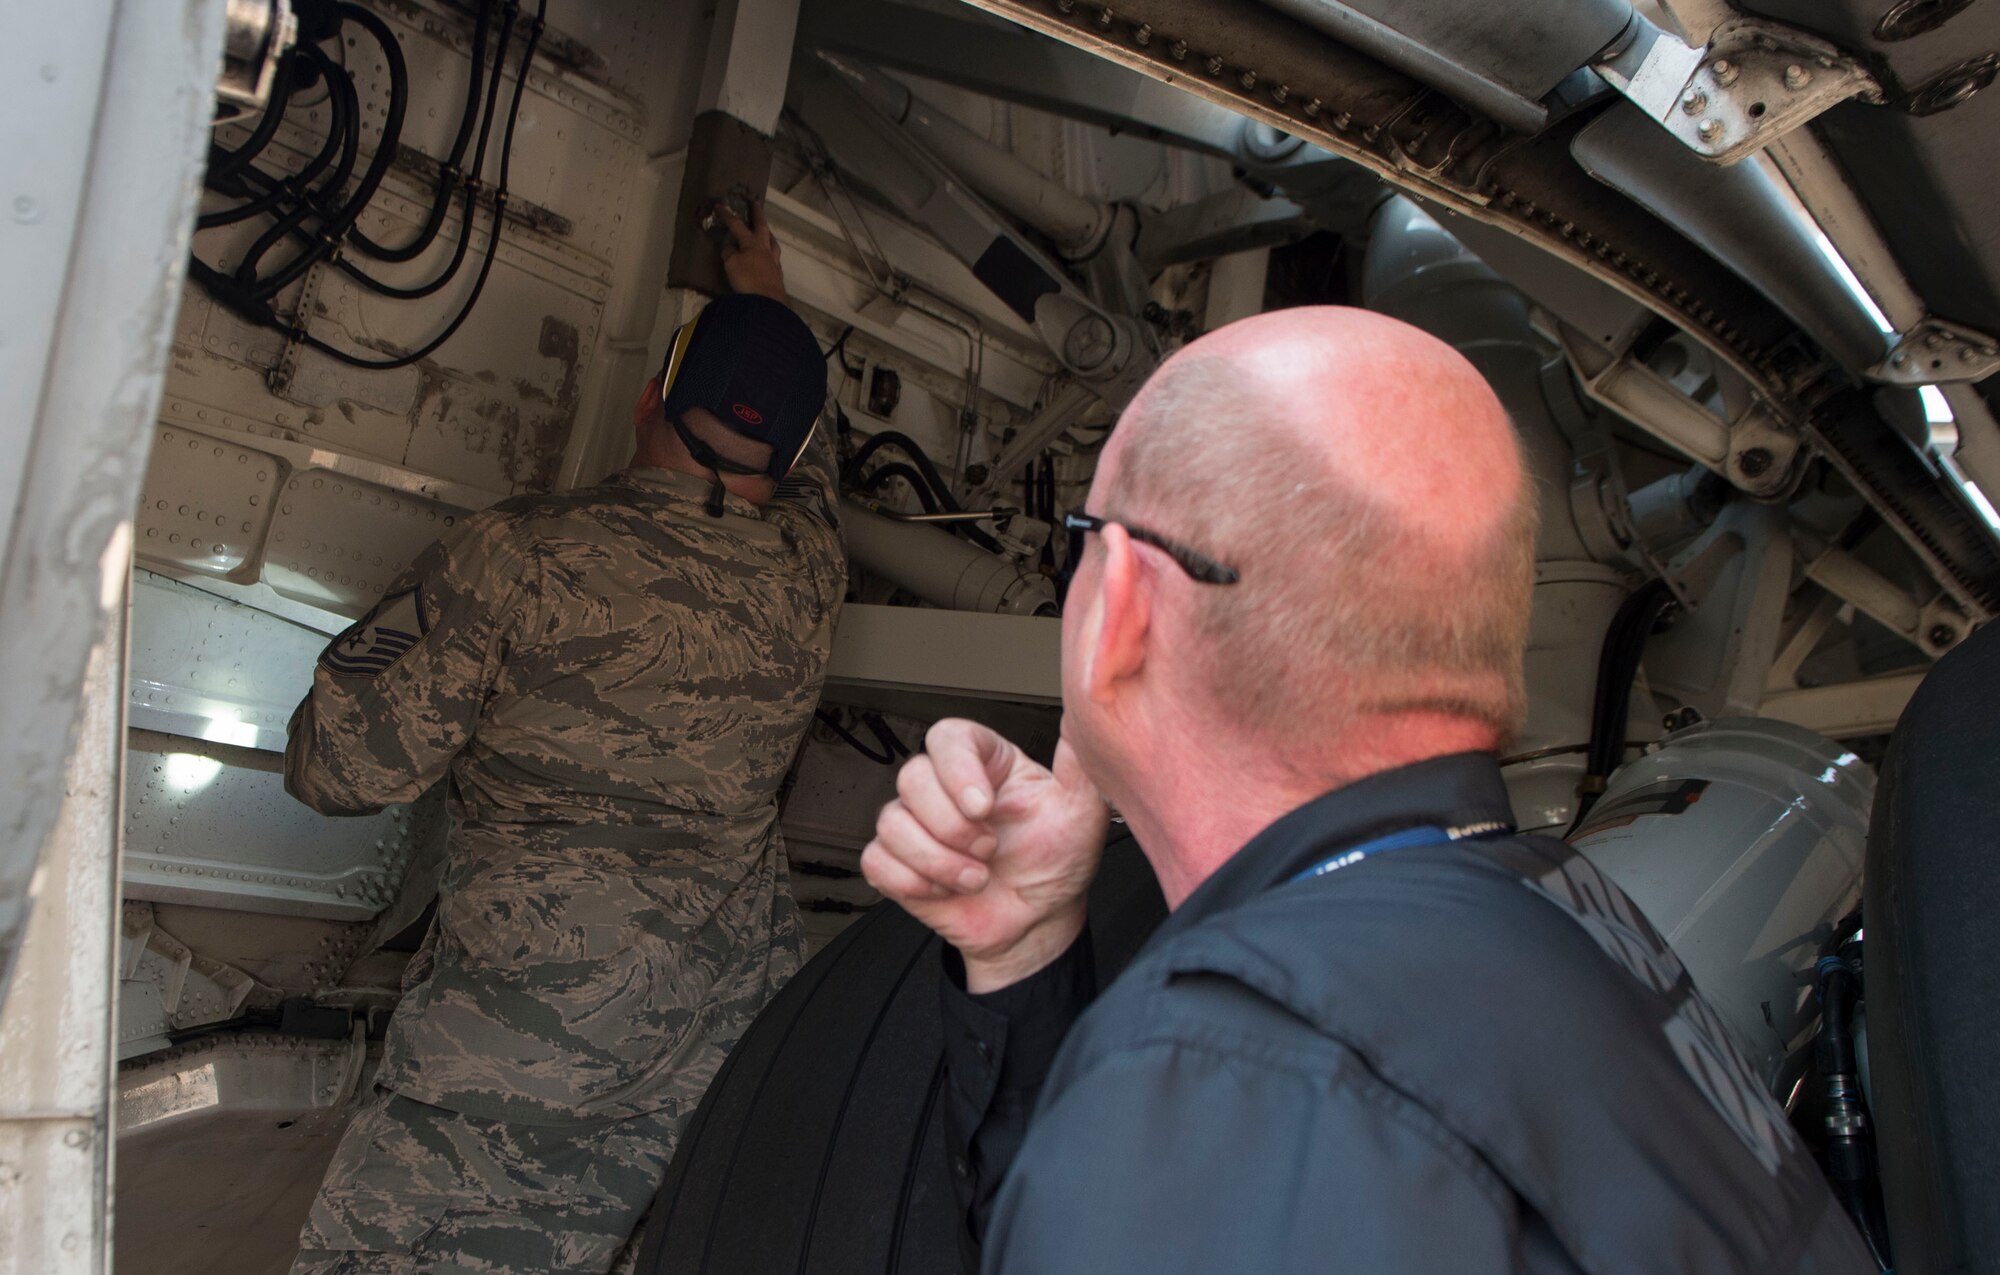 U.S. Air Force Master Sgt. Matthew Dowton, an Air Force corrosion manager assigned to Air Force Corrosion Protection Office, and Daniel Mars, a research corrosion analyst assigned to AFCPO, examine the exterior of a C-17 Globemaster III for corrosion August 22, 2018, Altus Air Force Base, Oklahoma. AFCPO dispatches teams to Air Force bases in order to examine aircraft for corrosion.